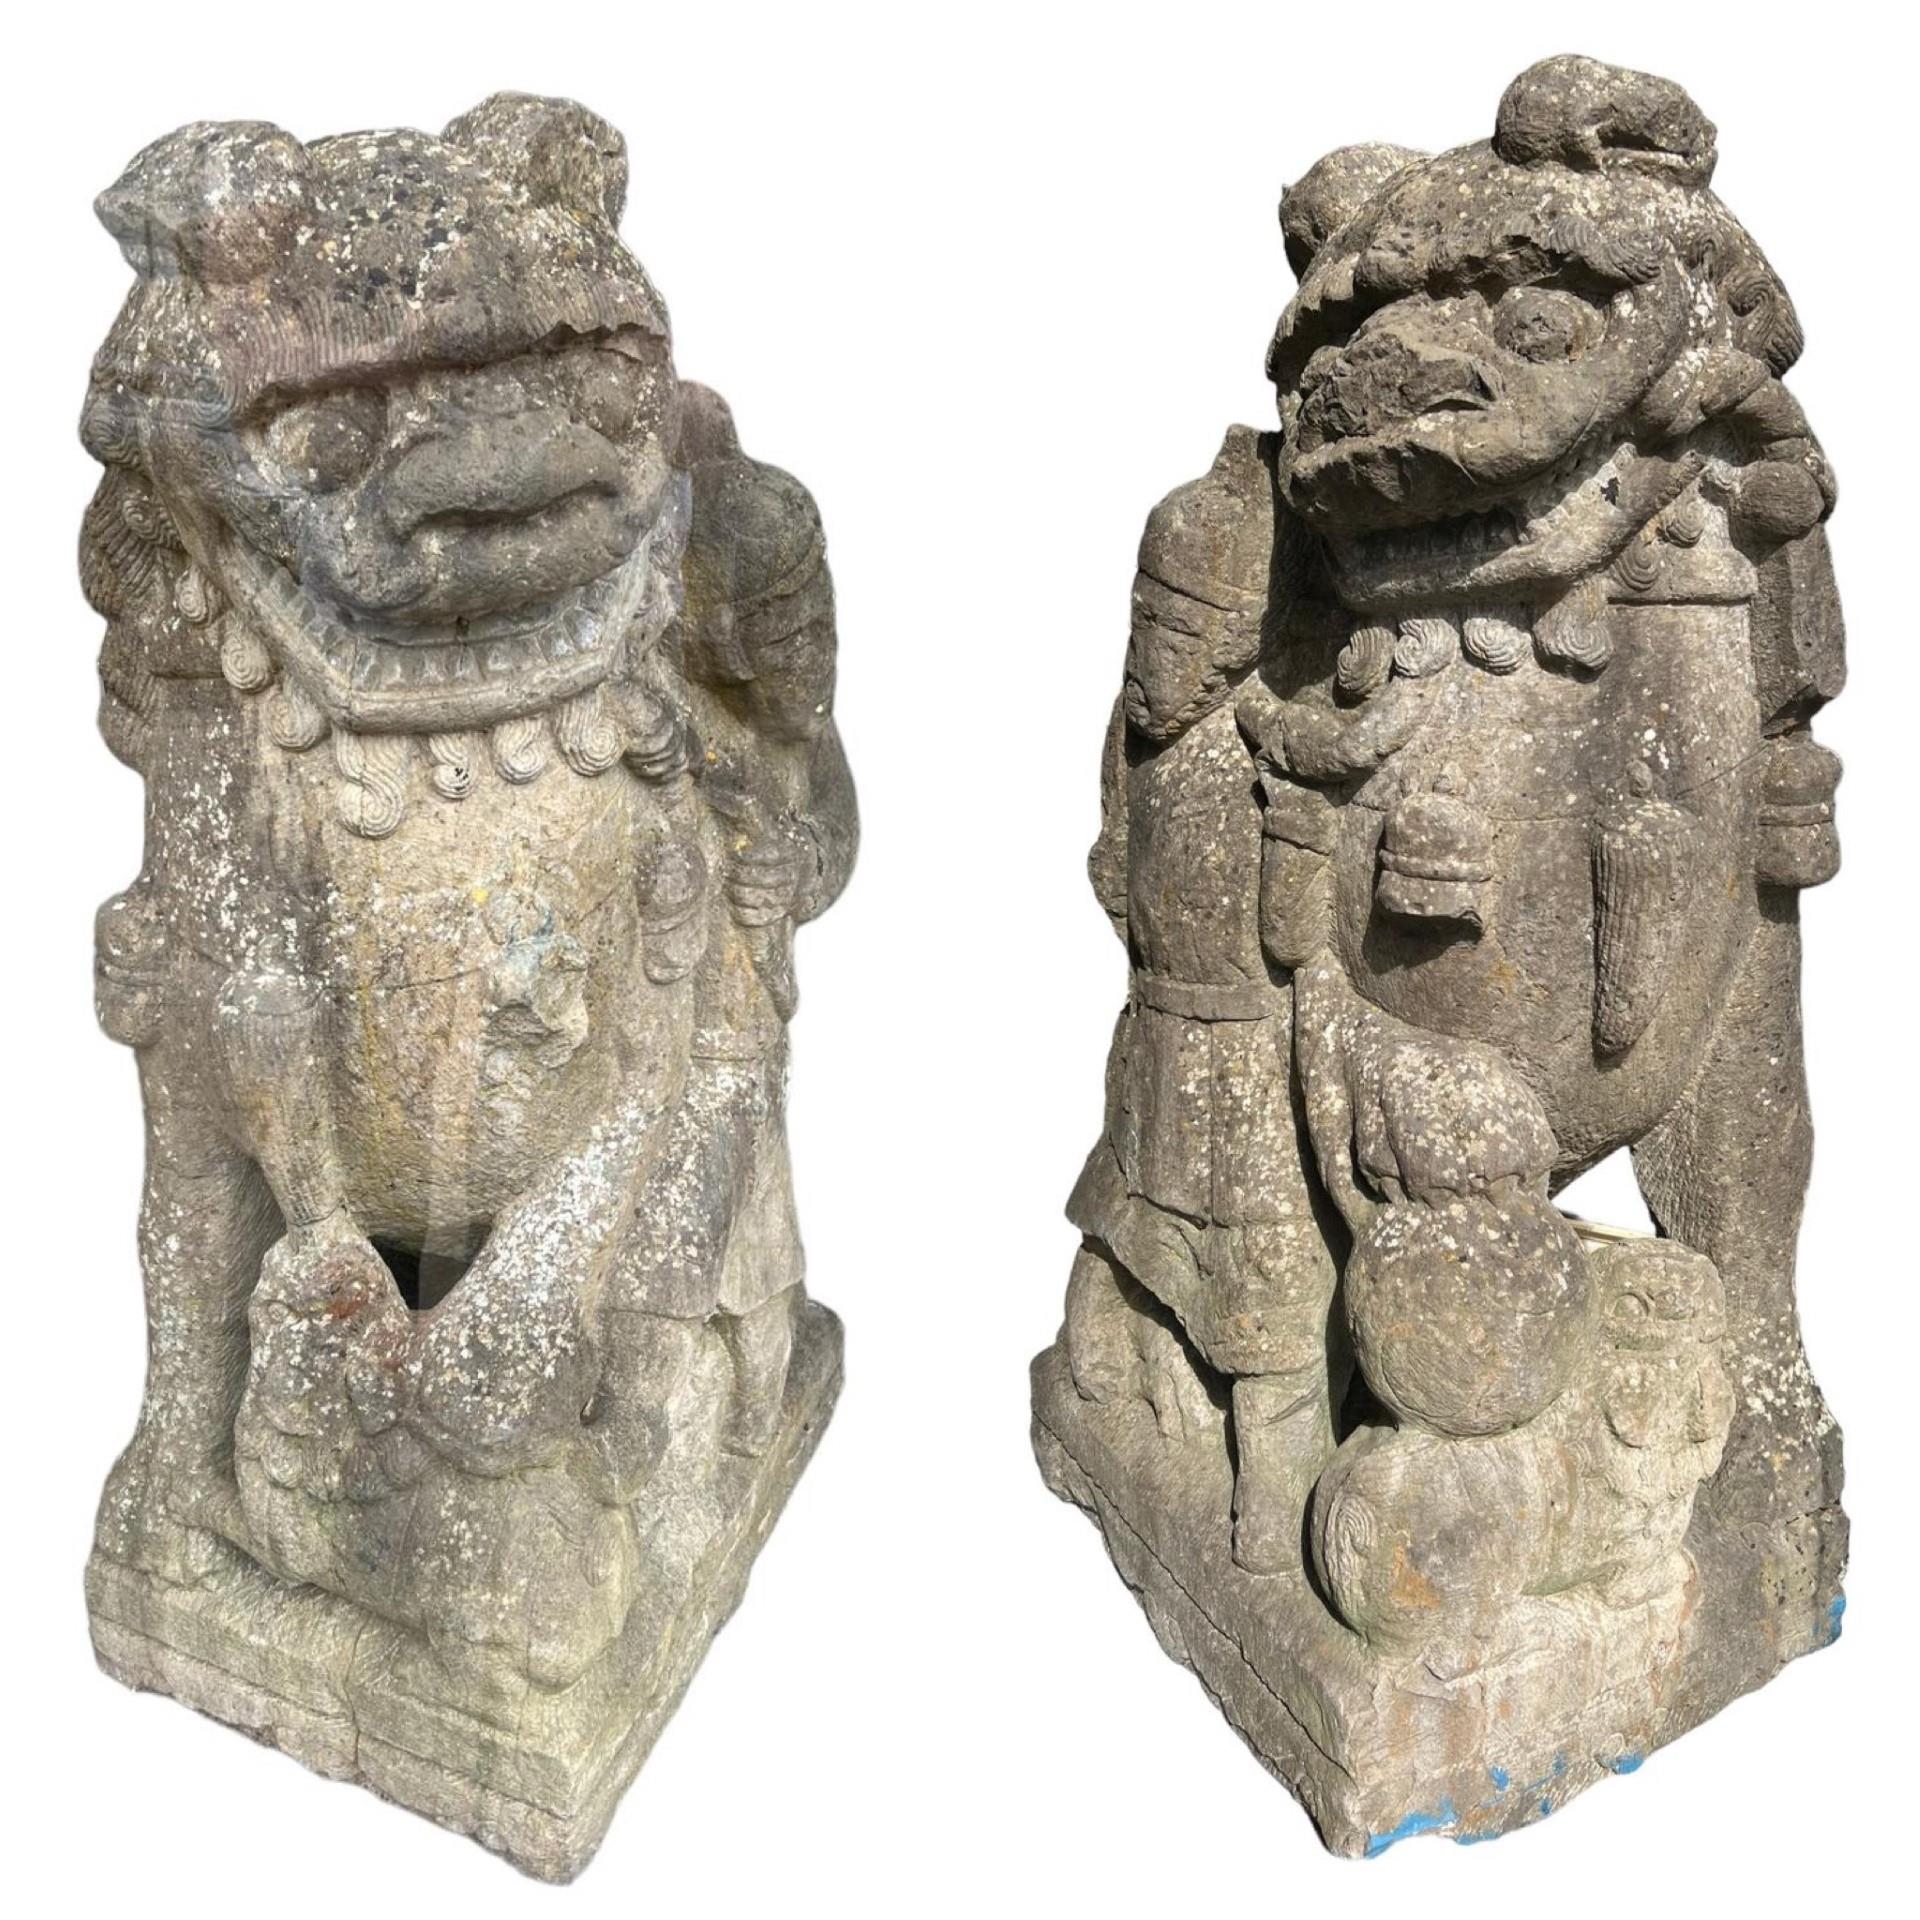 A LARGE RARE PAIR OF CHINESE 15TH CENTURY CARVED STONE MING DYNASTY YONGLE PERIOD BUDDHIST LIONS - Image 2 of 20